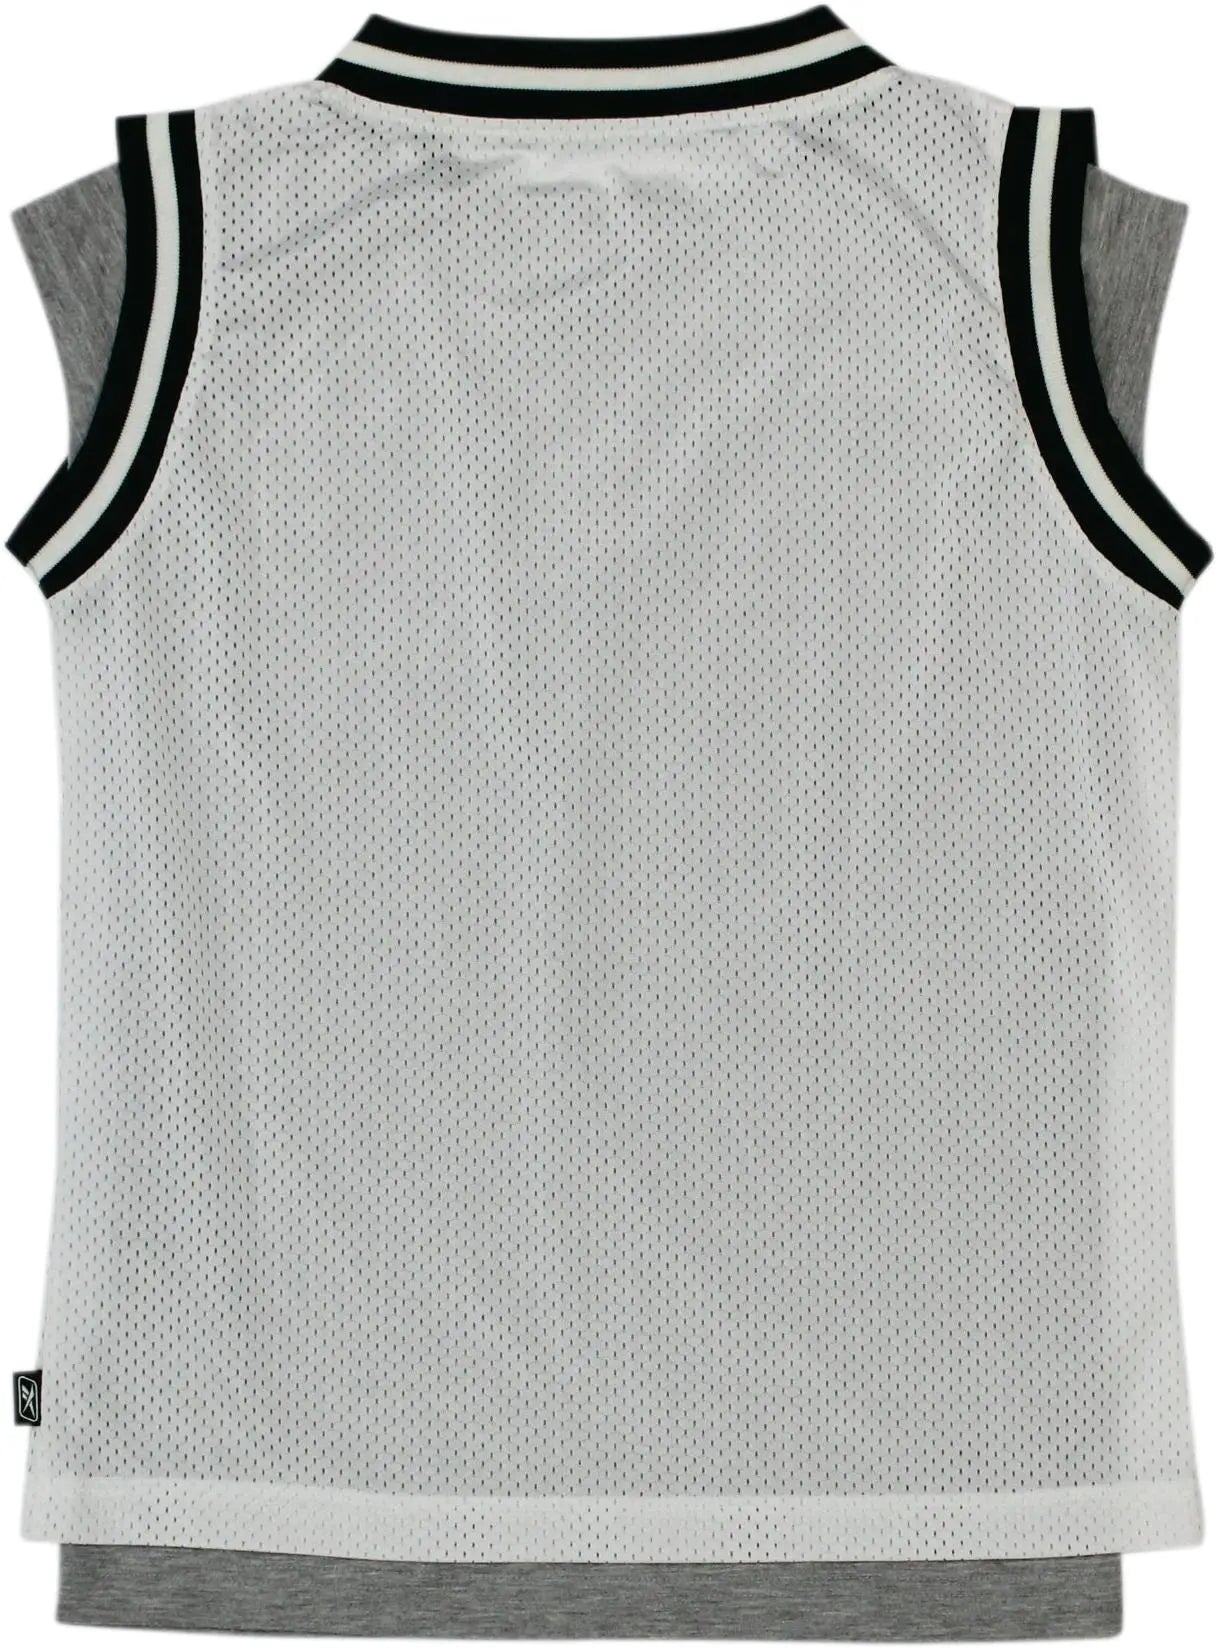 Reebok - White Football Singlet by Reebok- ThriftTale.com - Vintage and second handclothing